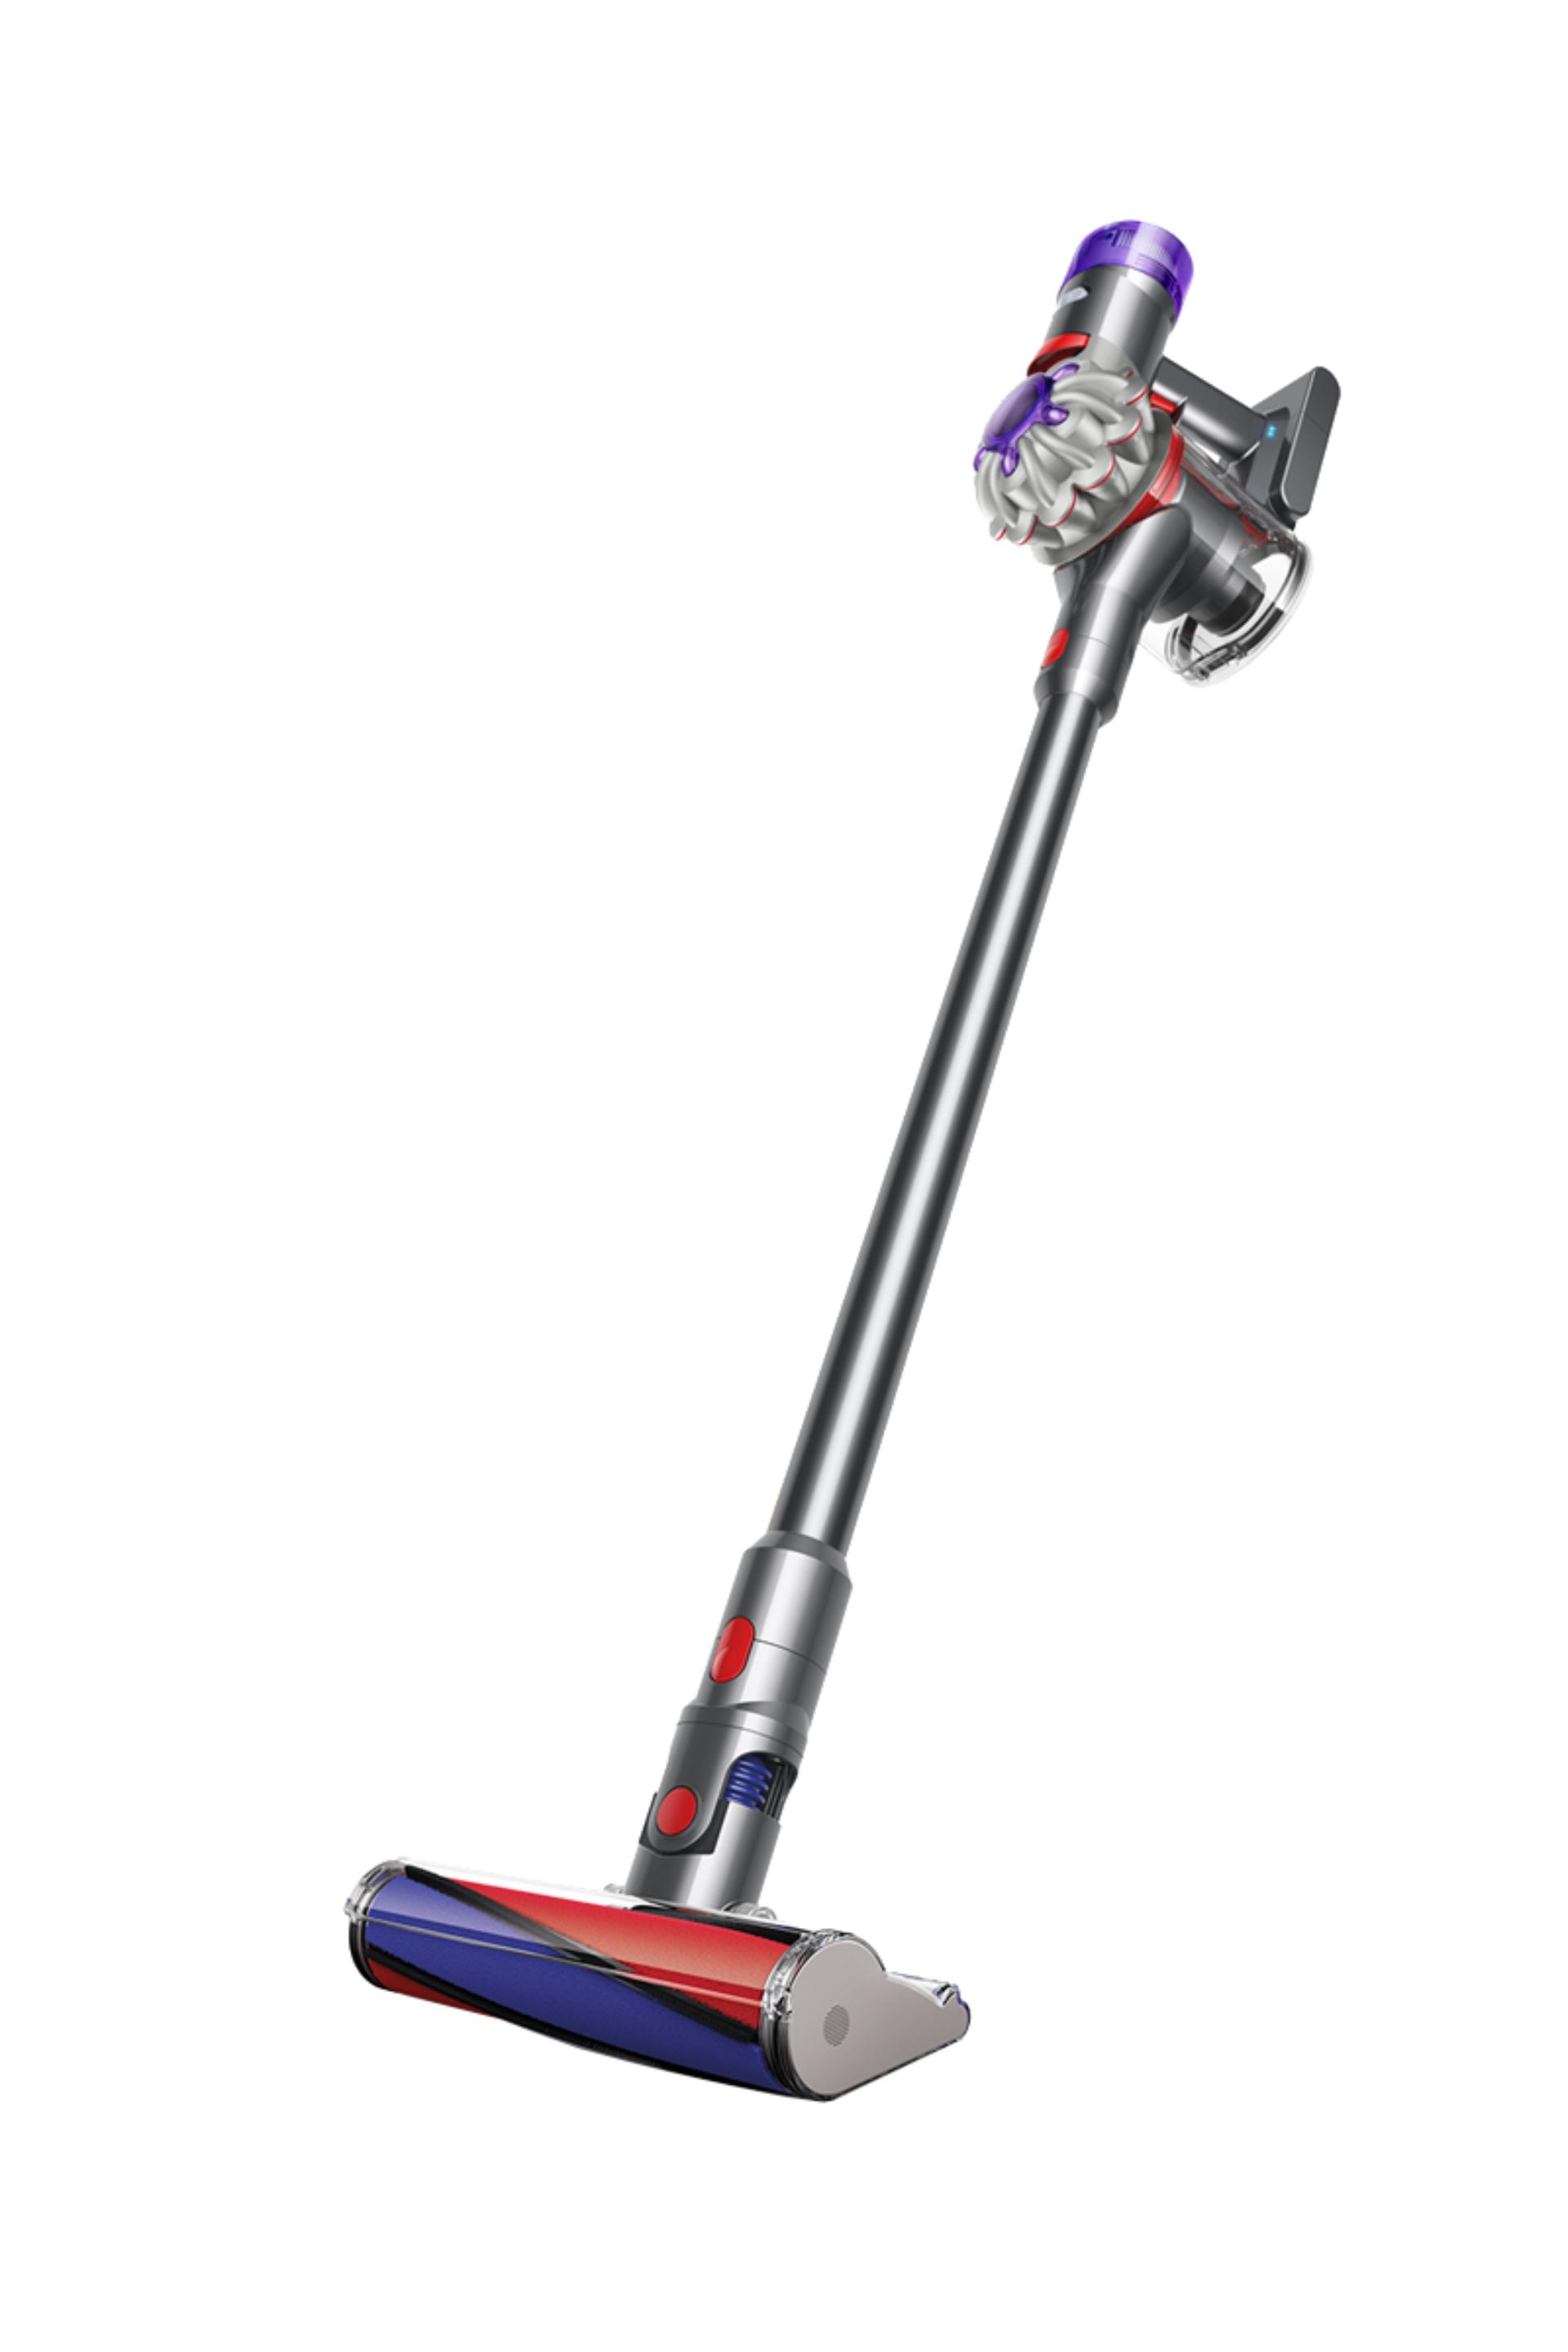 Dyson V8 Absolute including Fluffy cleaner head, Motorbar head, and 3 free tools $399